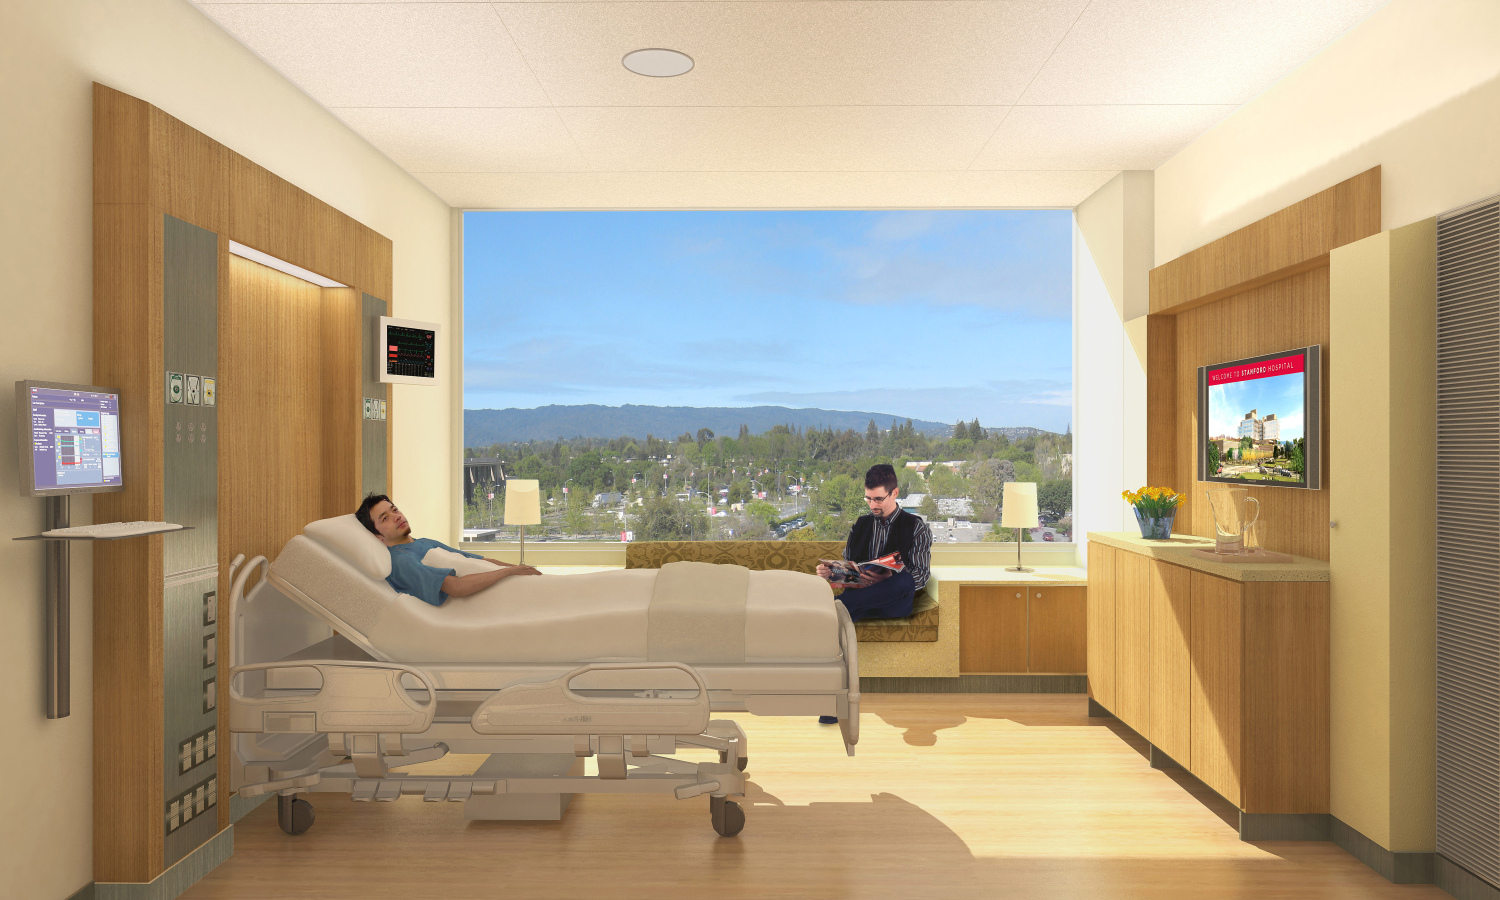 hospital stanford interior mazzetti related projects